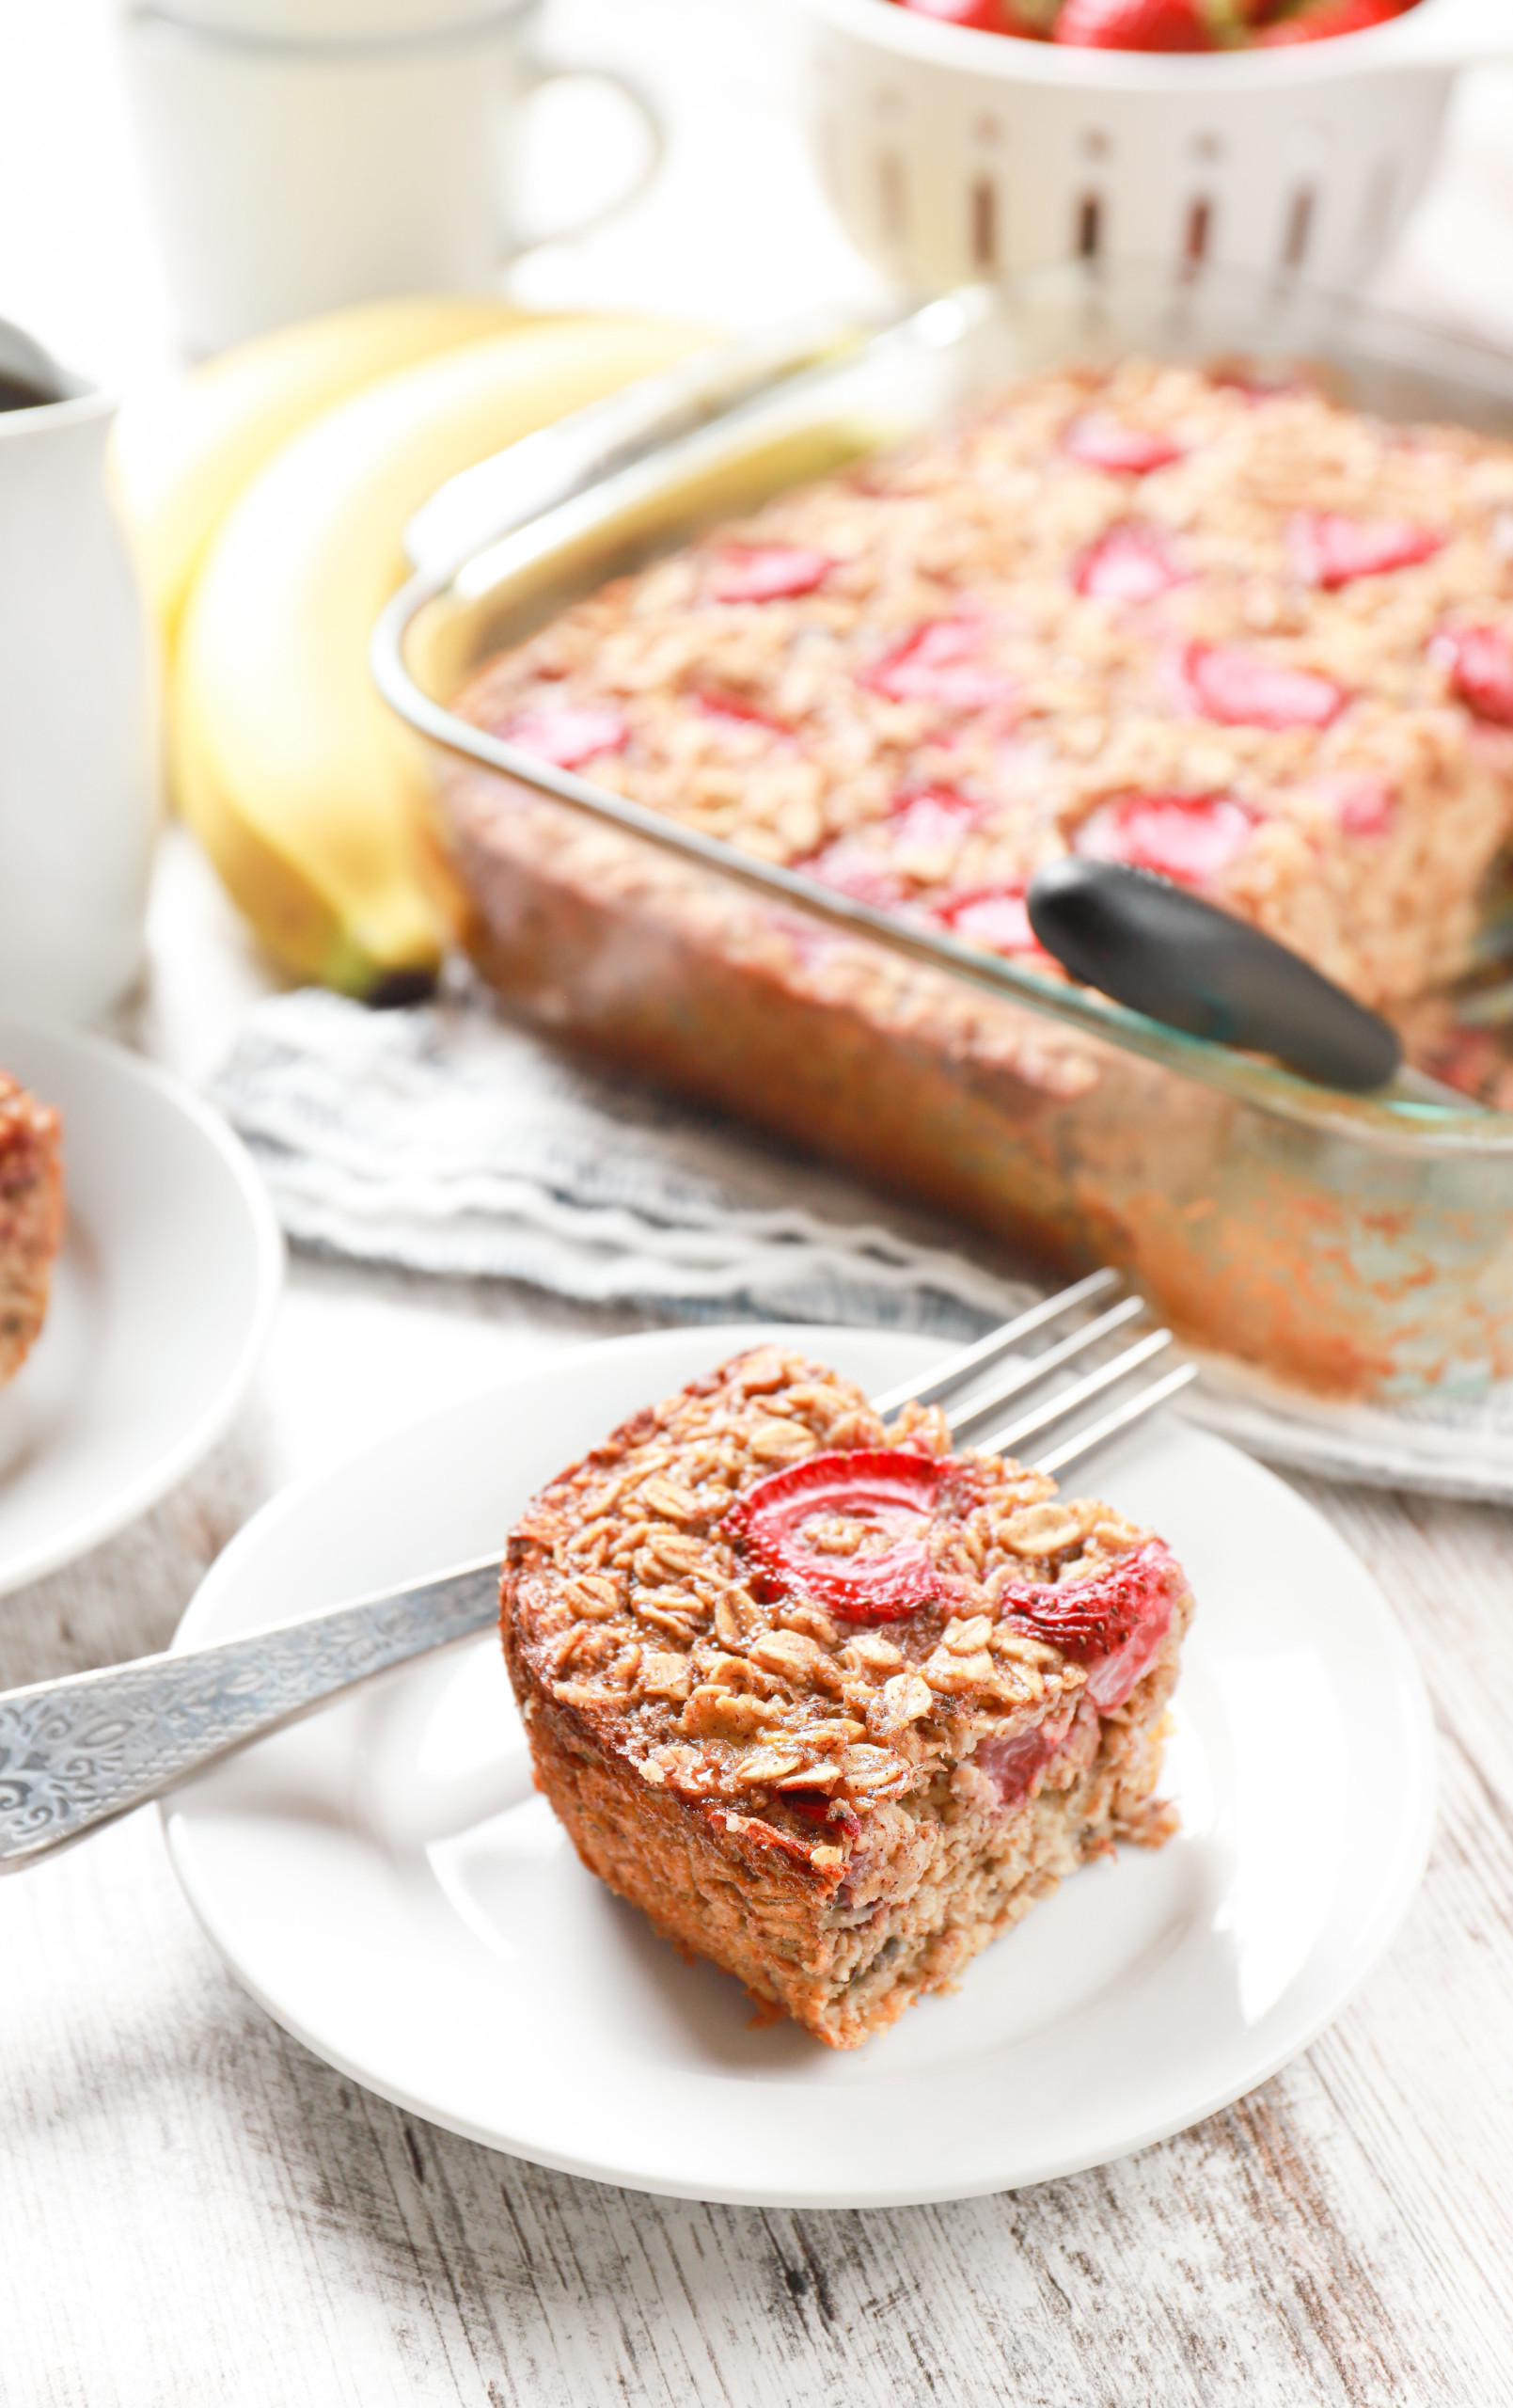 A piece of strawberry banana bread baked oatmeal on a small white plate with a baking dish of the remaining baked oatmeal in the background.